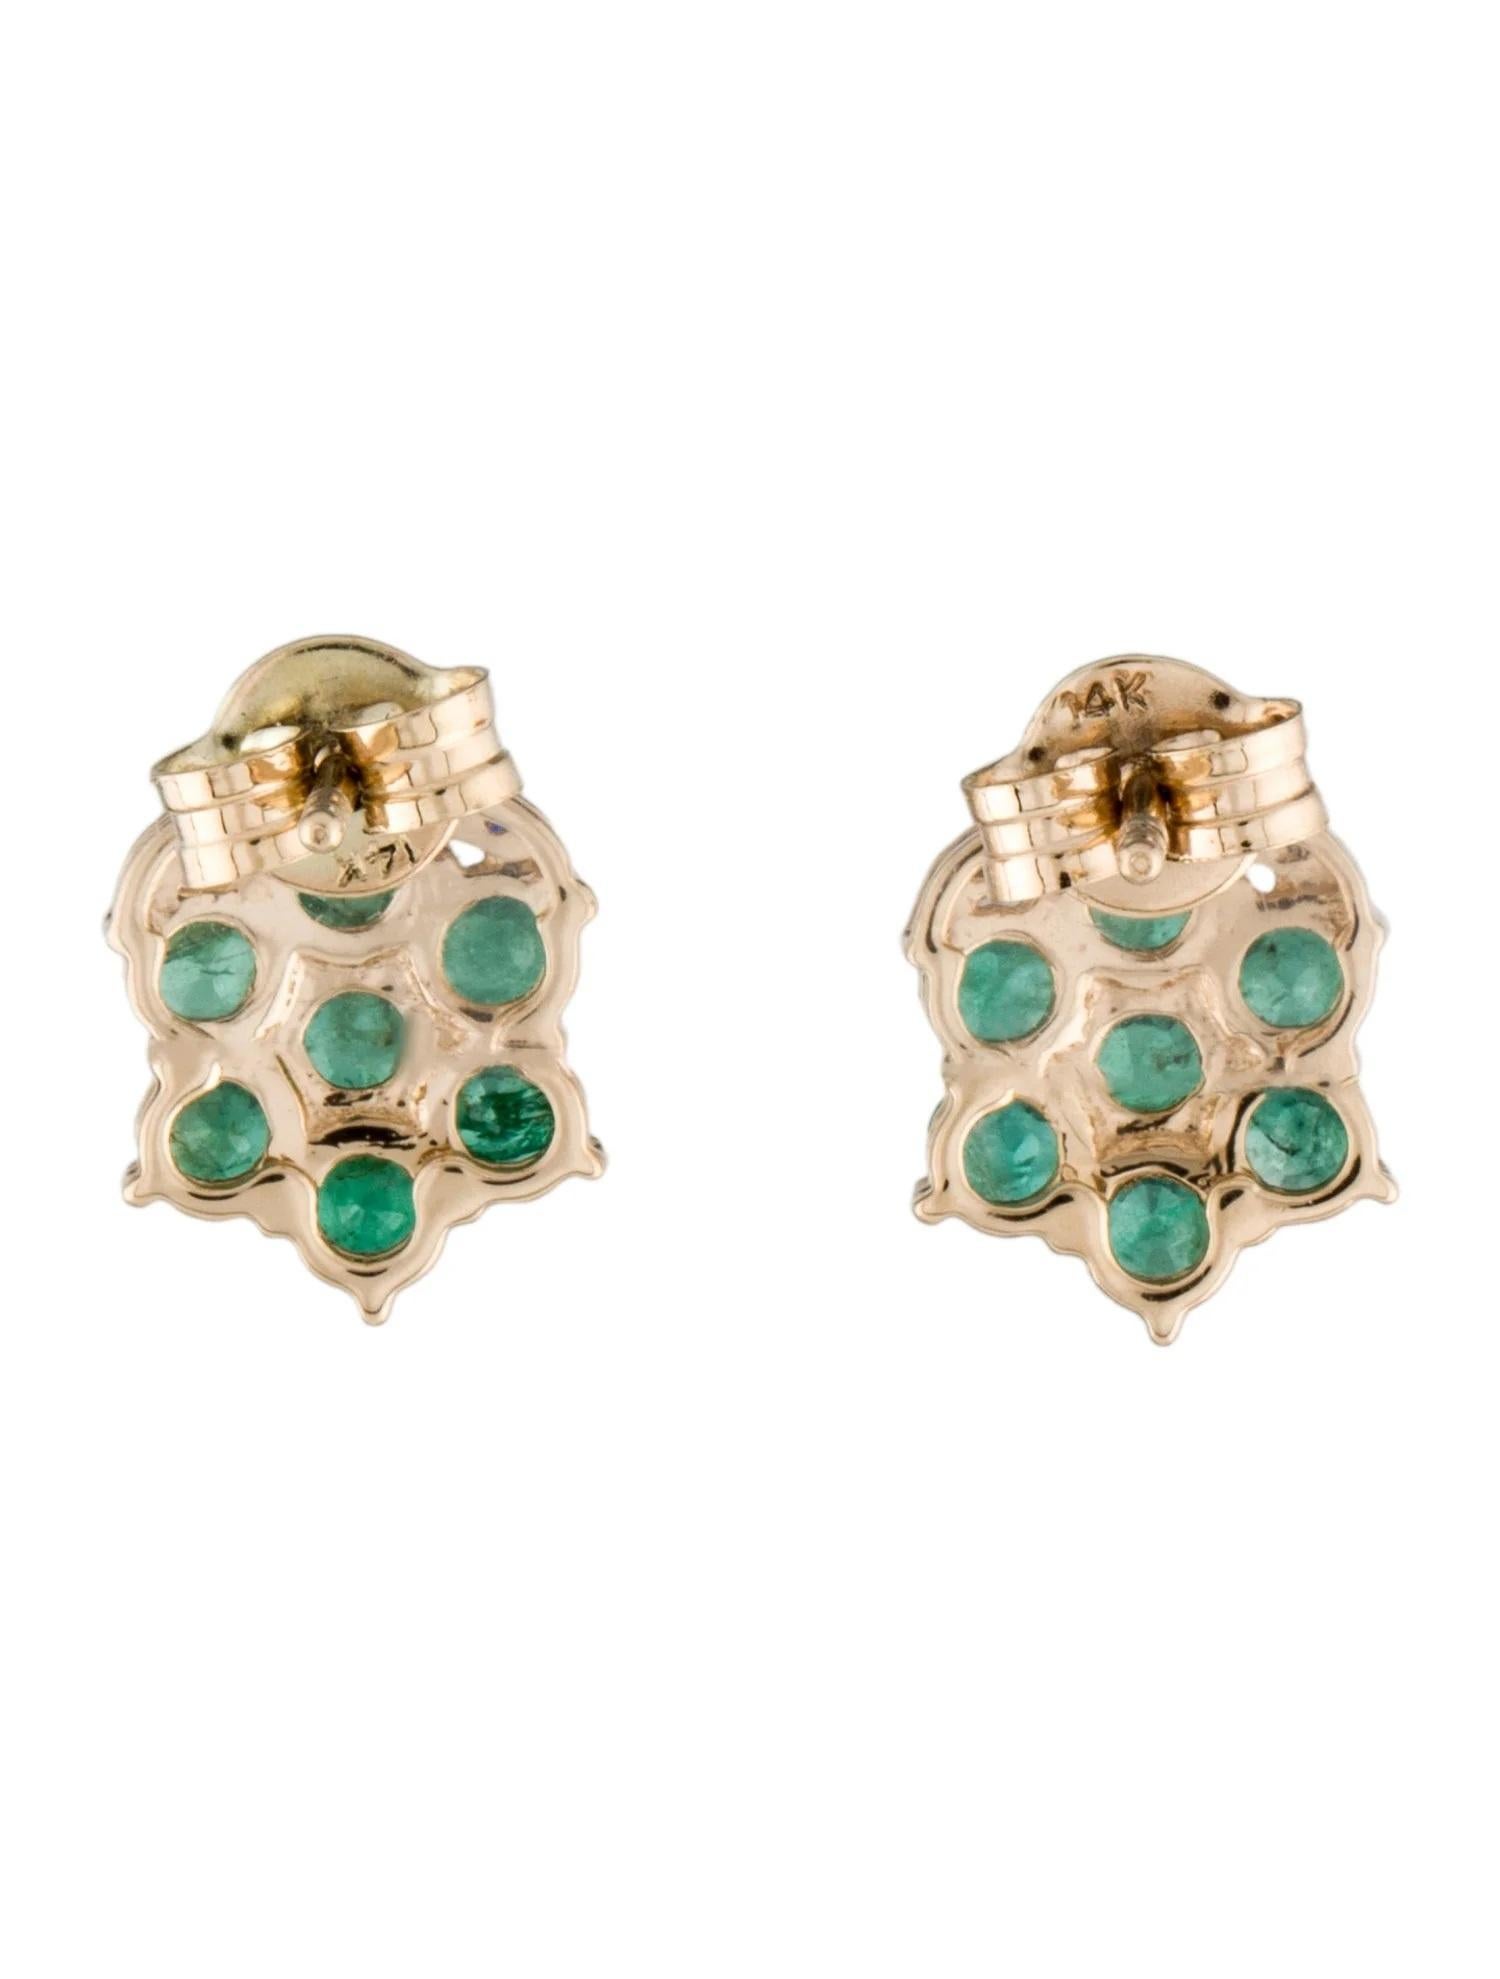 Artist Elegant 14K Yellow Gold Earrings with Emerald and Diamond Accents For Sale